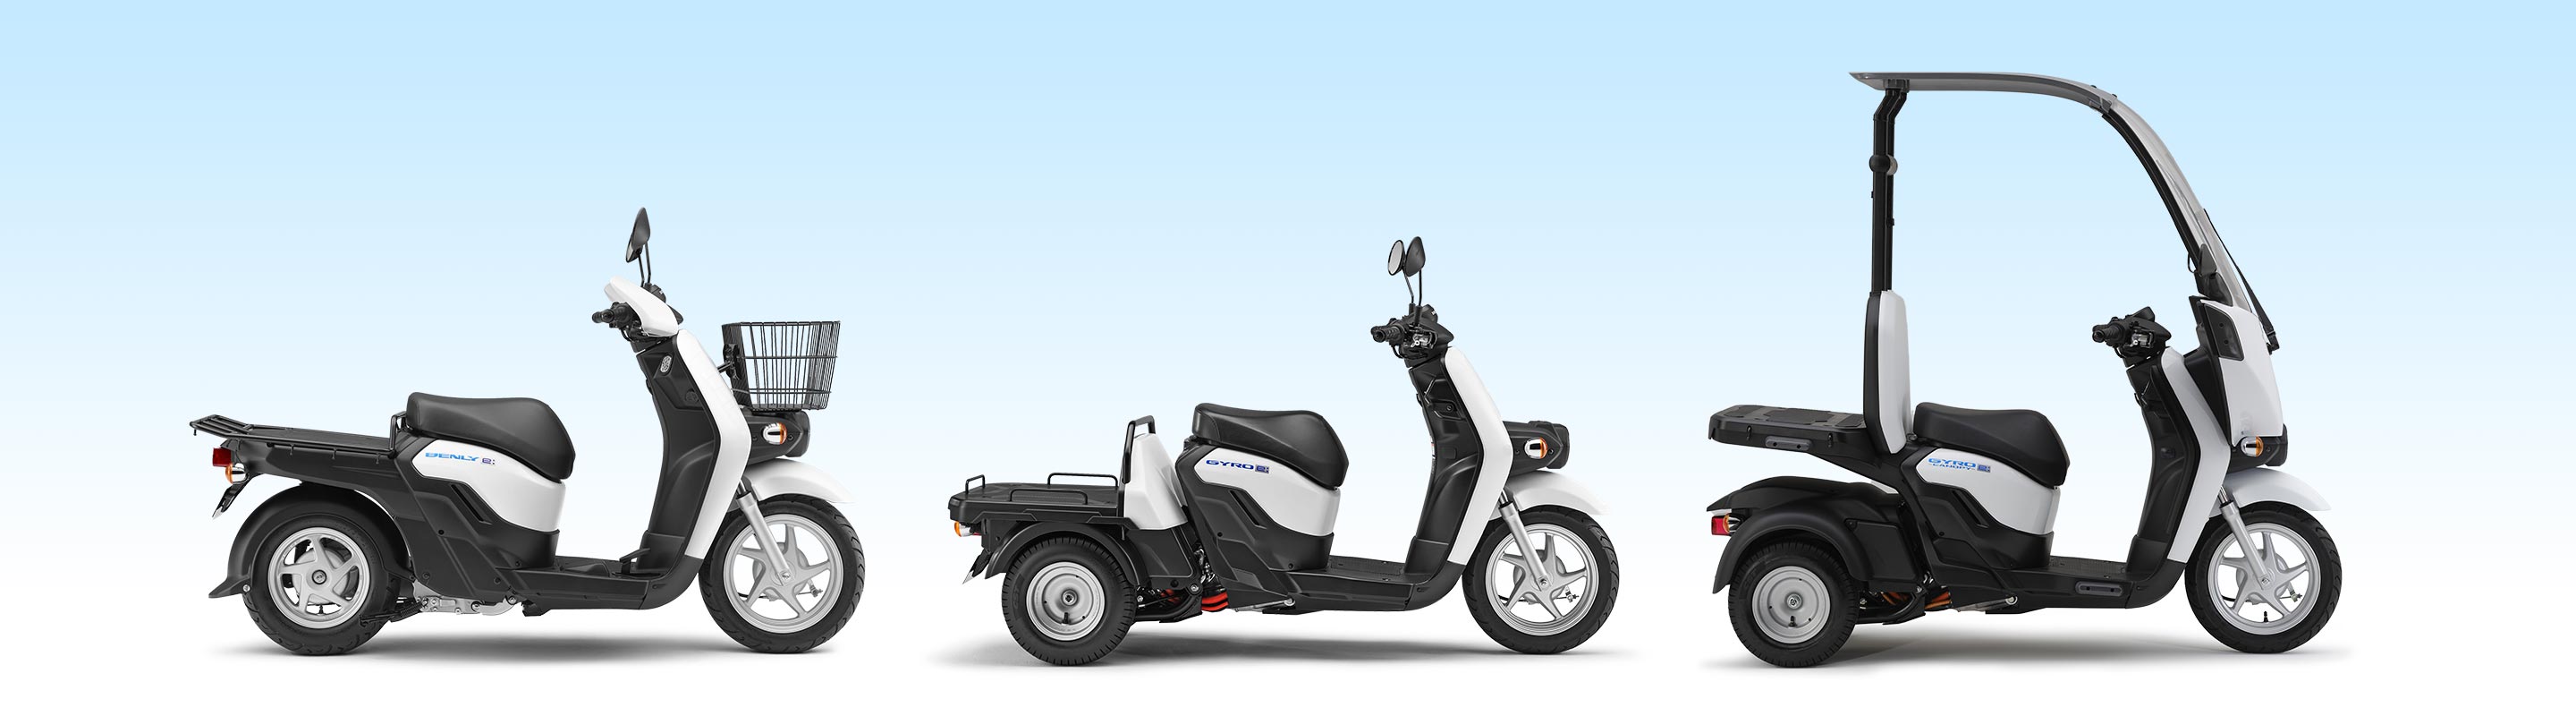 Efforts to Promote the Use of Electric Motorcycles